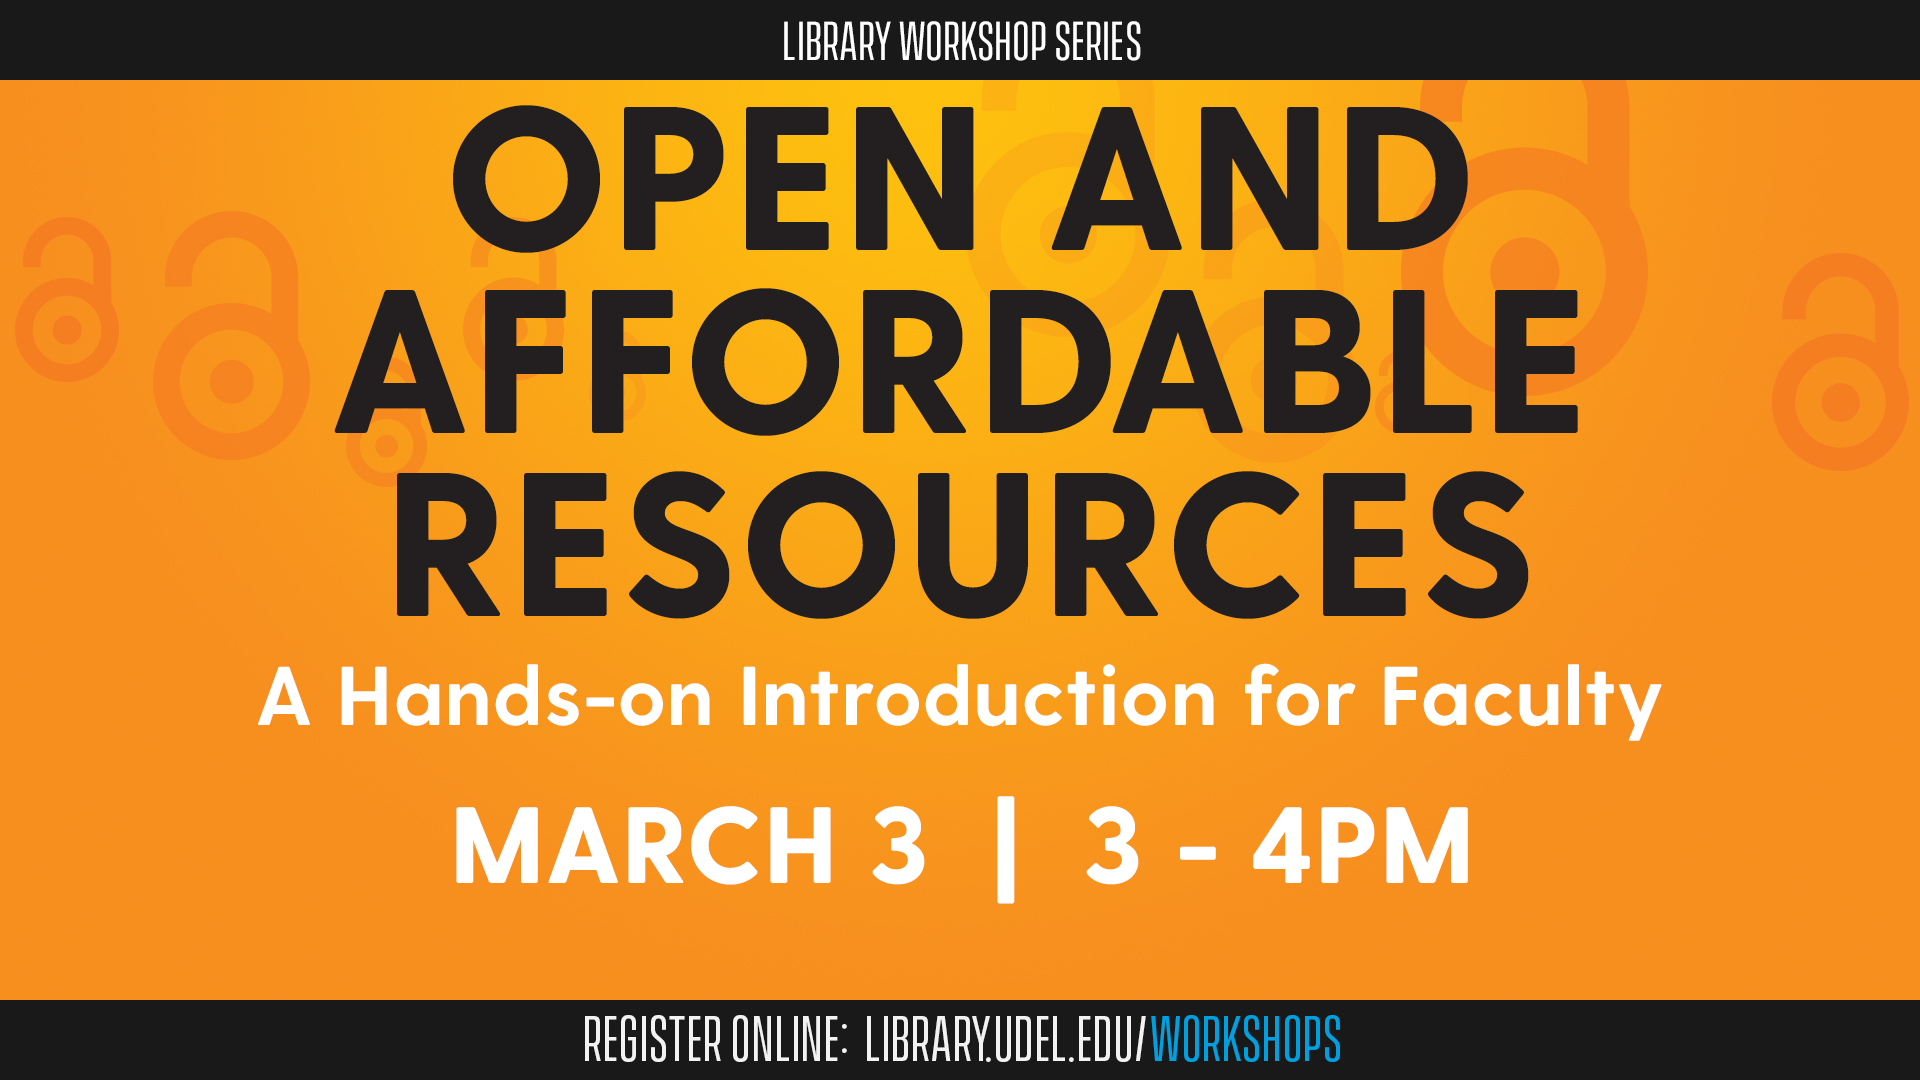 Promotional image for Open and Affordable Resources: A Hands-on Introduction for Faculty